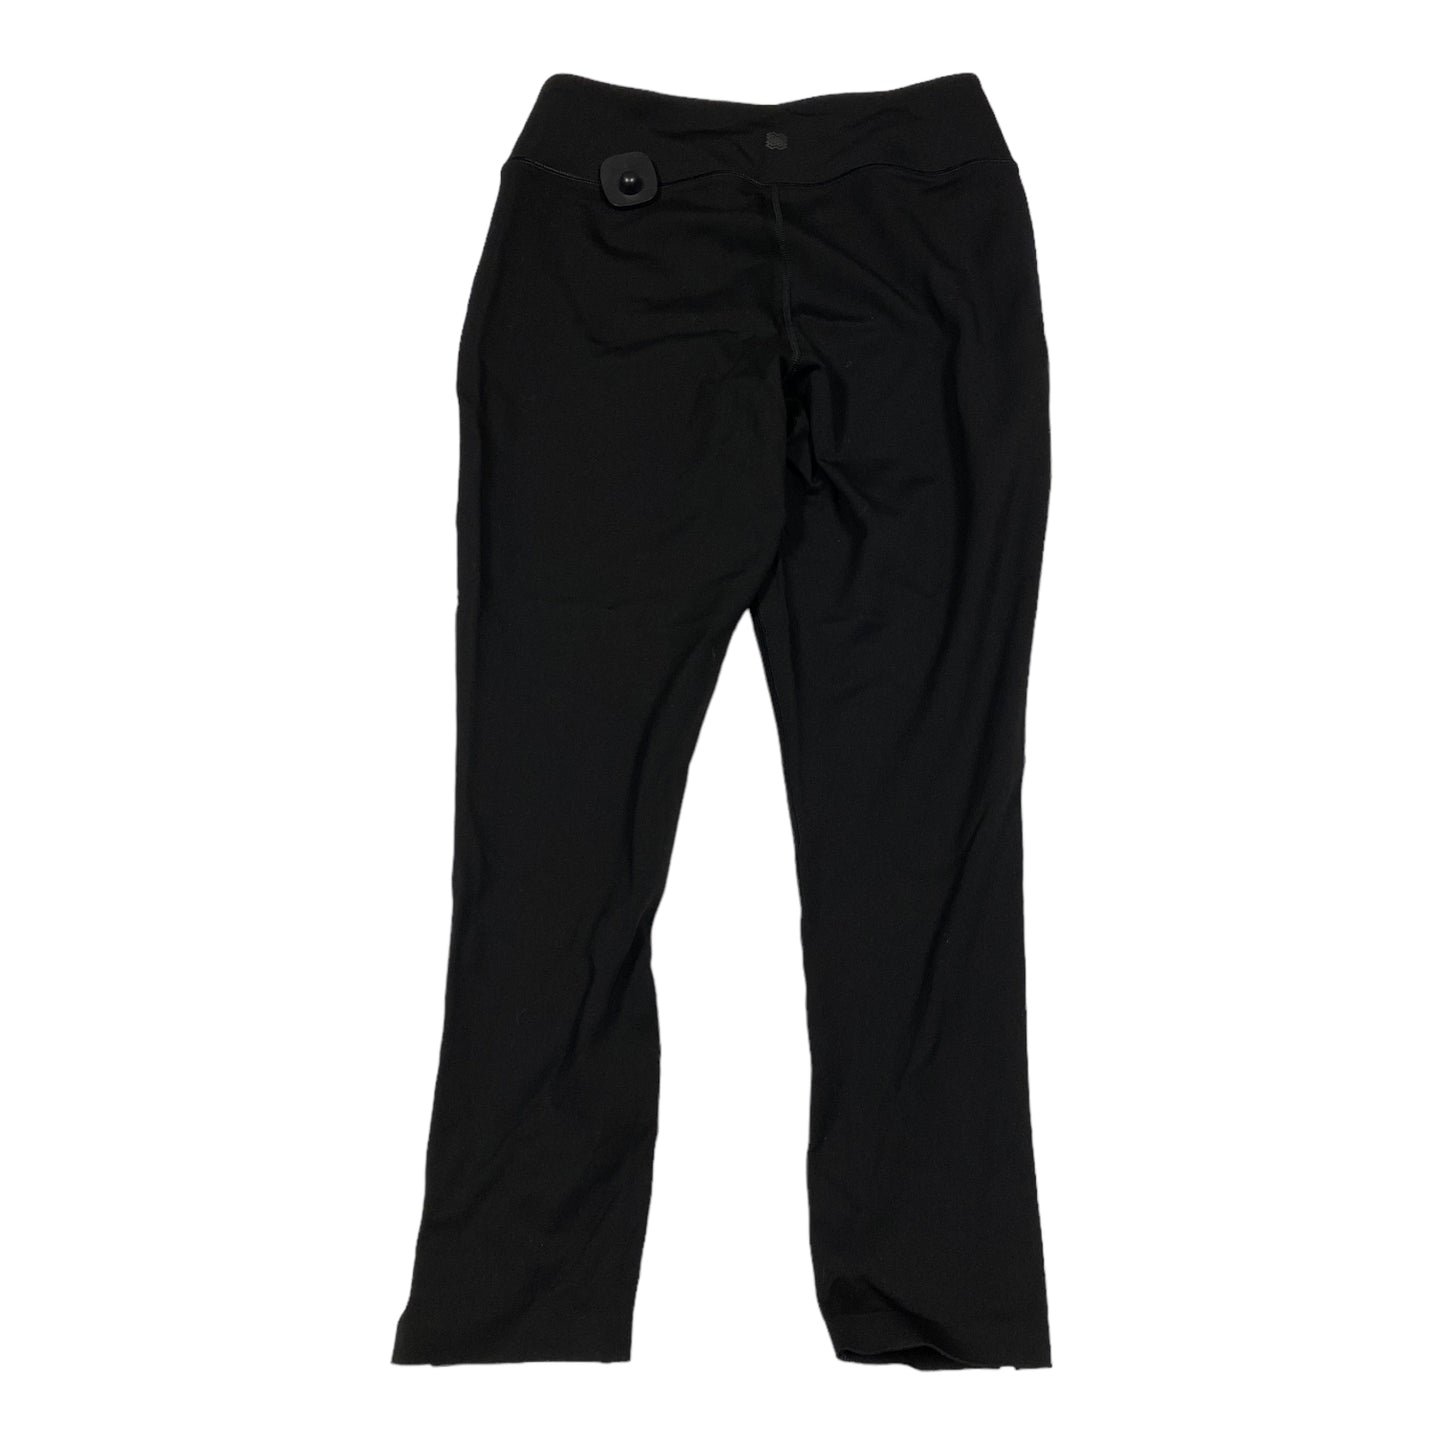 Athletic Pants By Flx  Size: L